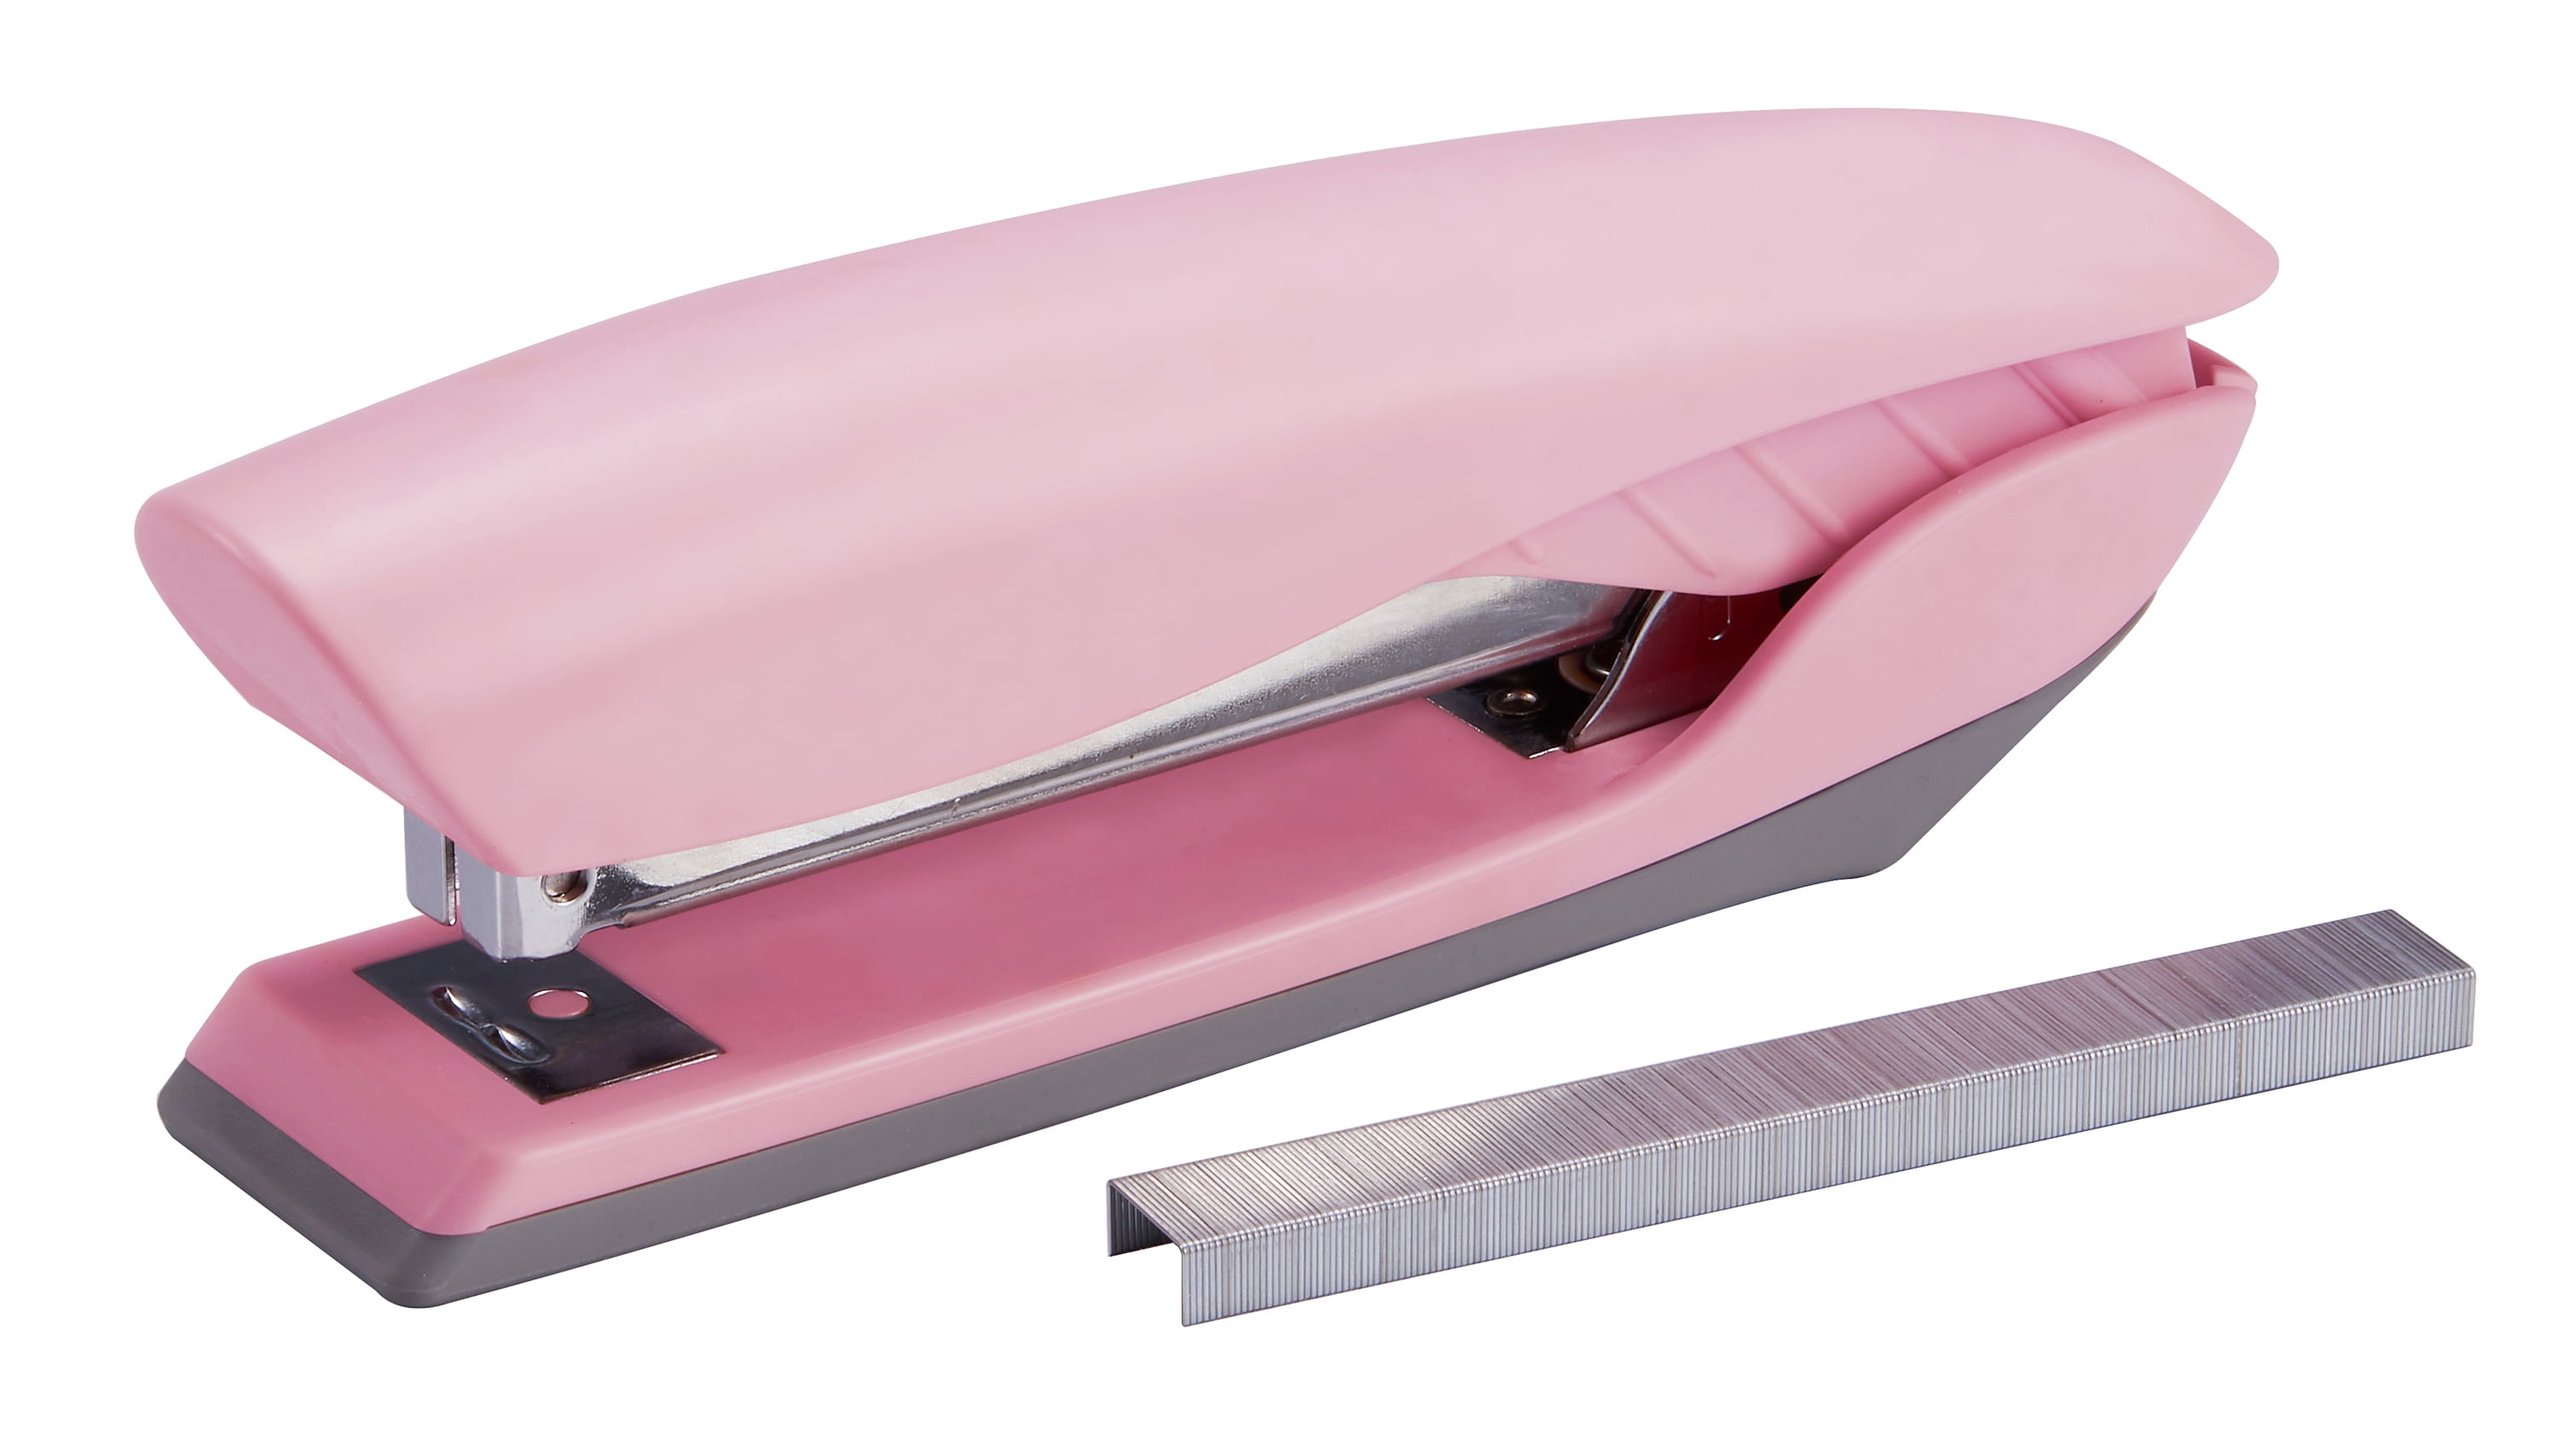 Durable Rose Gold Stapler Set with 1000 Pieces Staples and 10 Binder Clips Stapler with Staples Pink Stapler for Desk Pink Office Supplies Cute Desk Accessories for Home Office School Supplies 